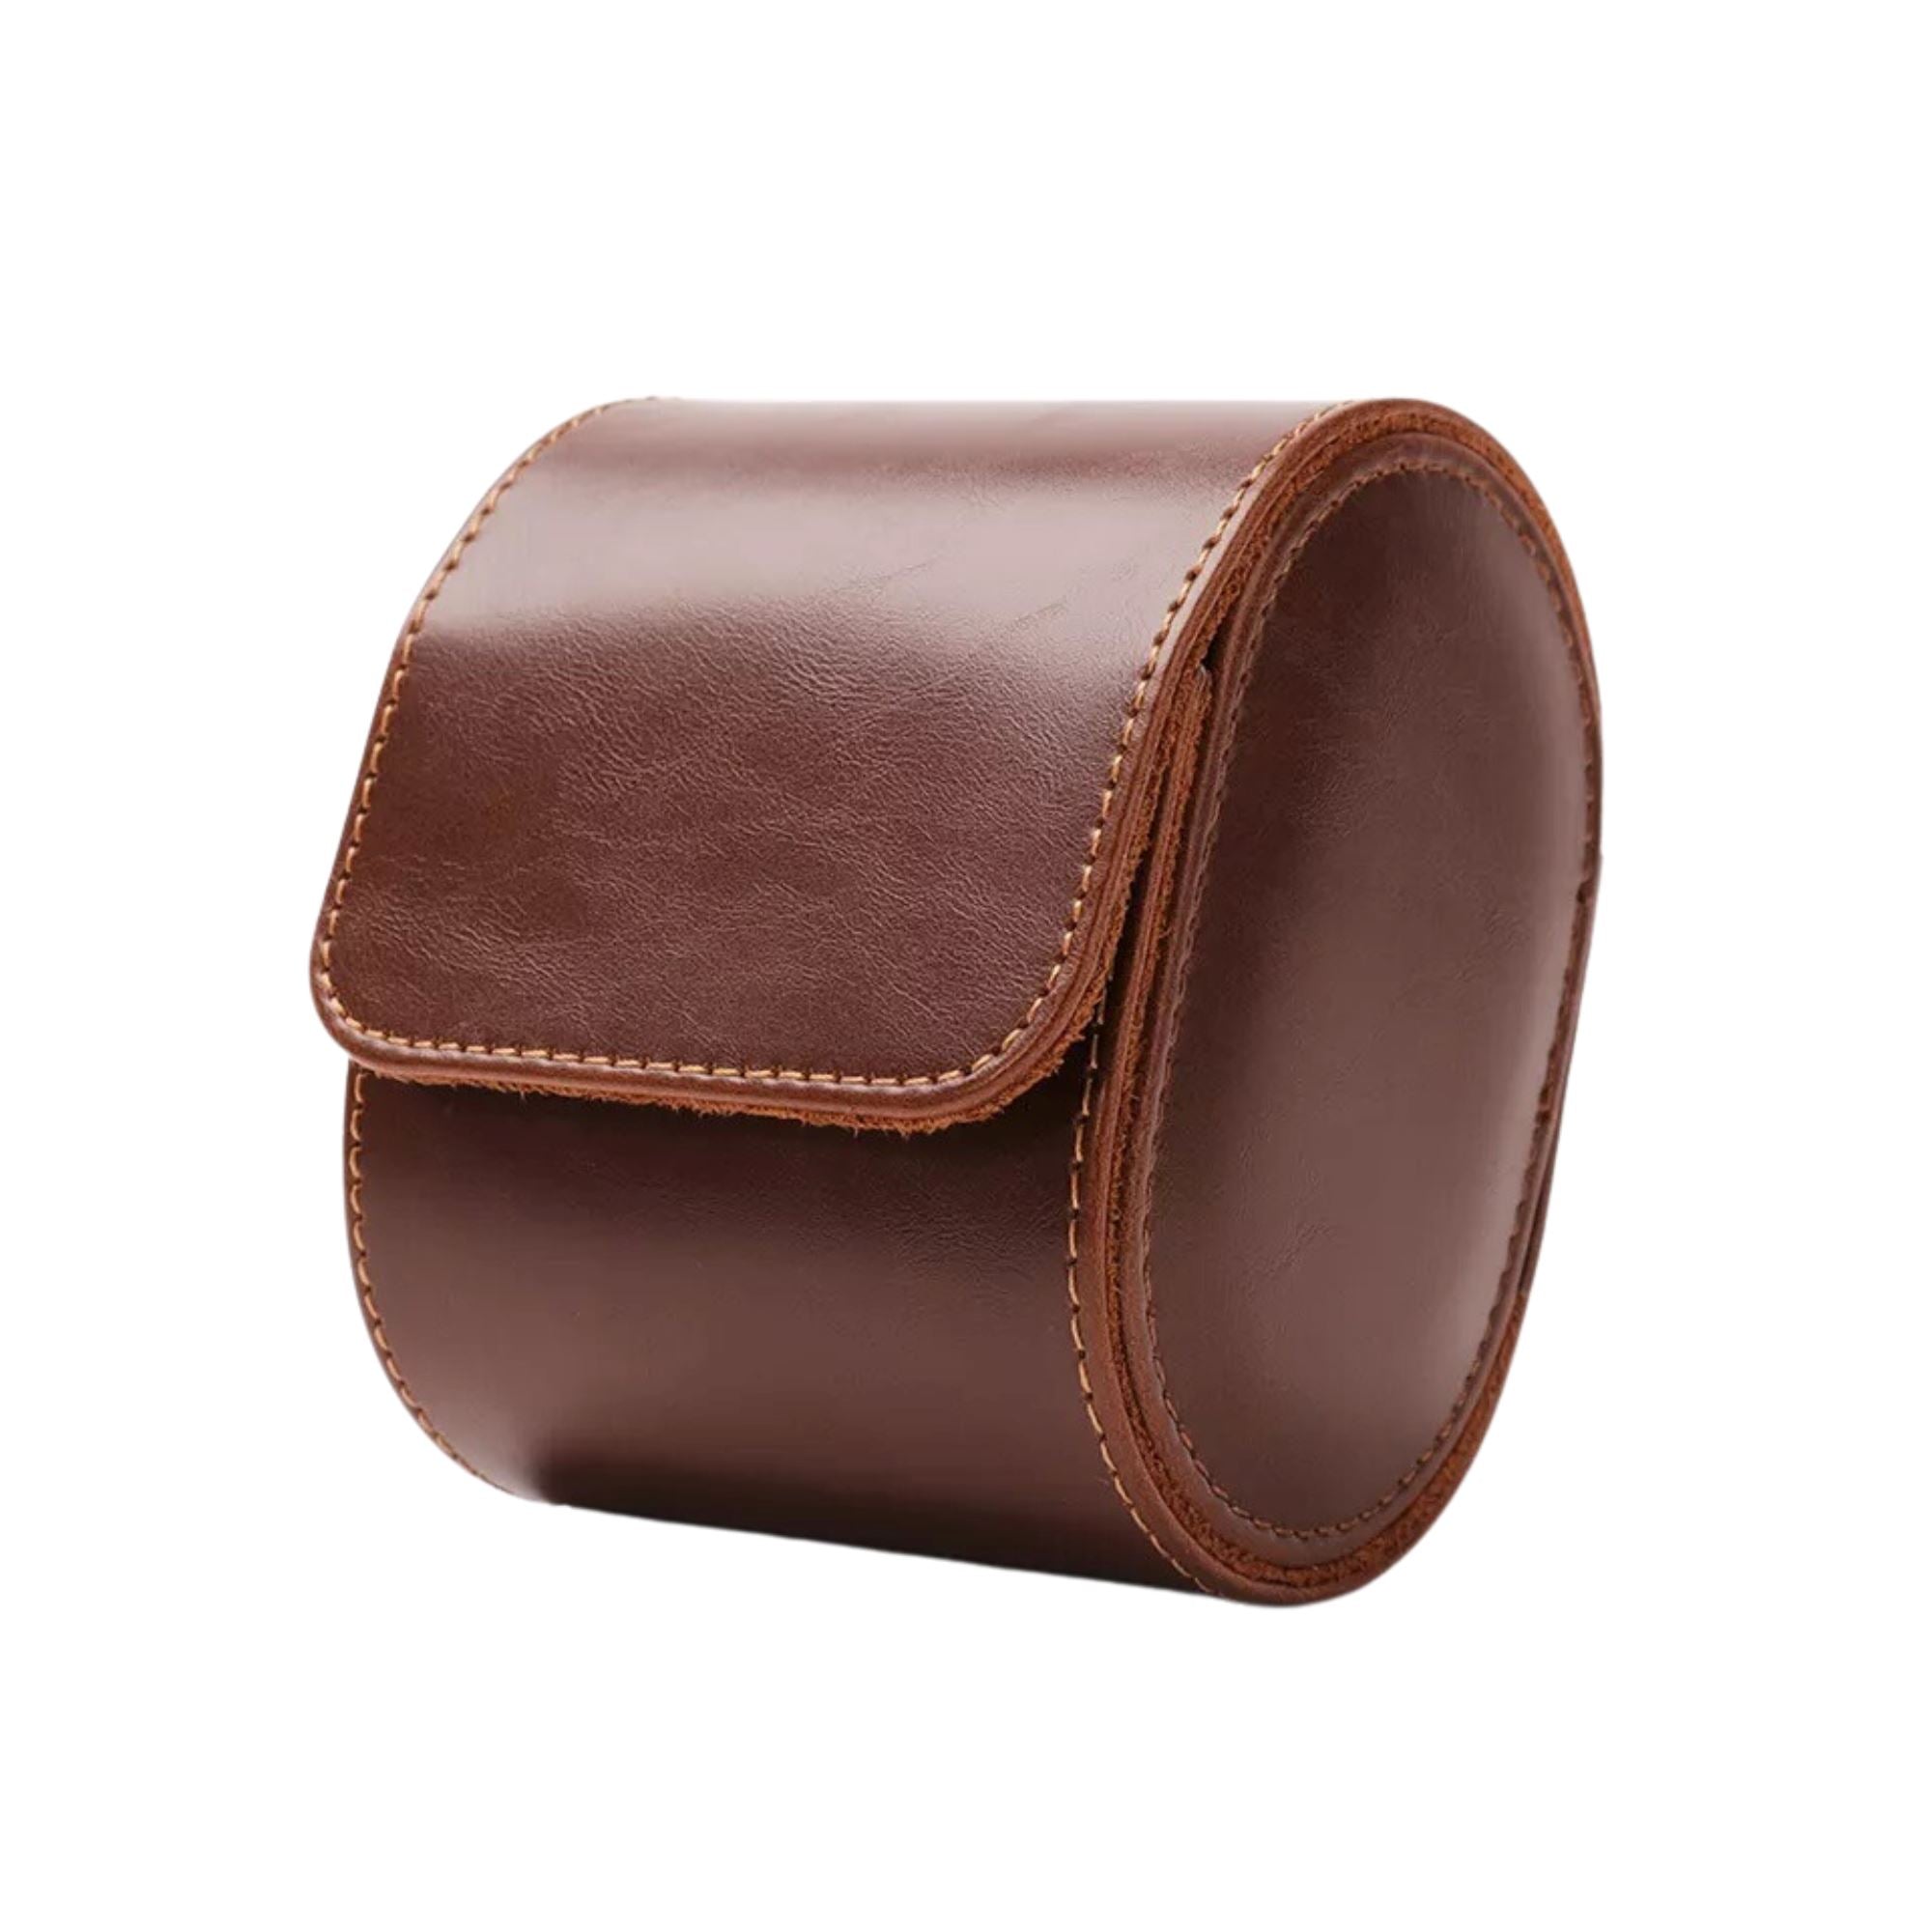 Watch Roll Case for 1 in Brown Vegan Leather Watch Boxes Clinks 